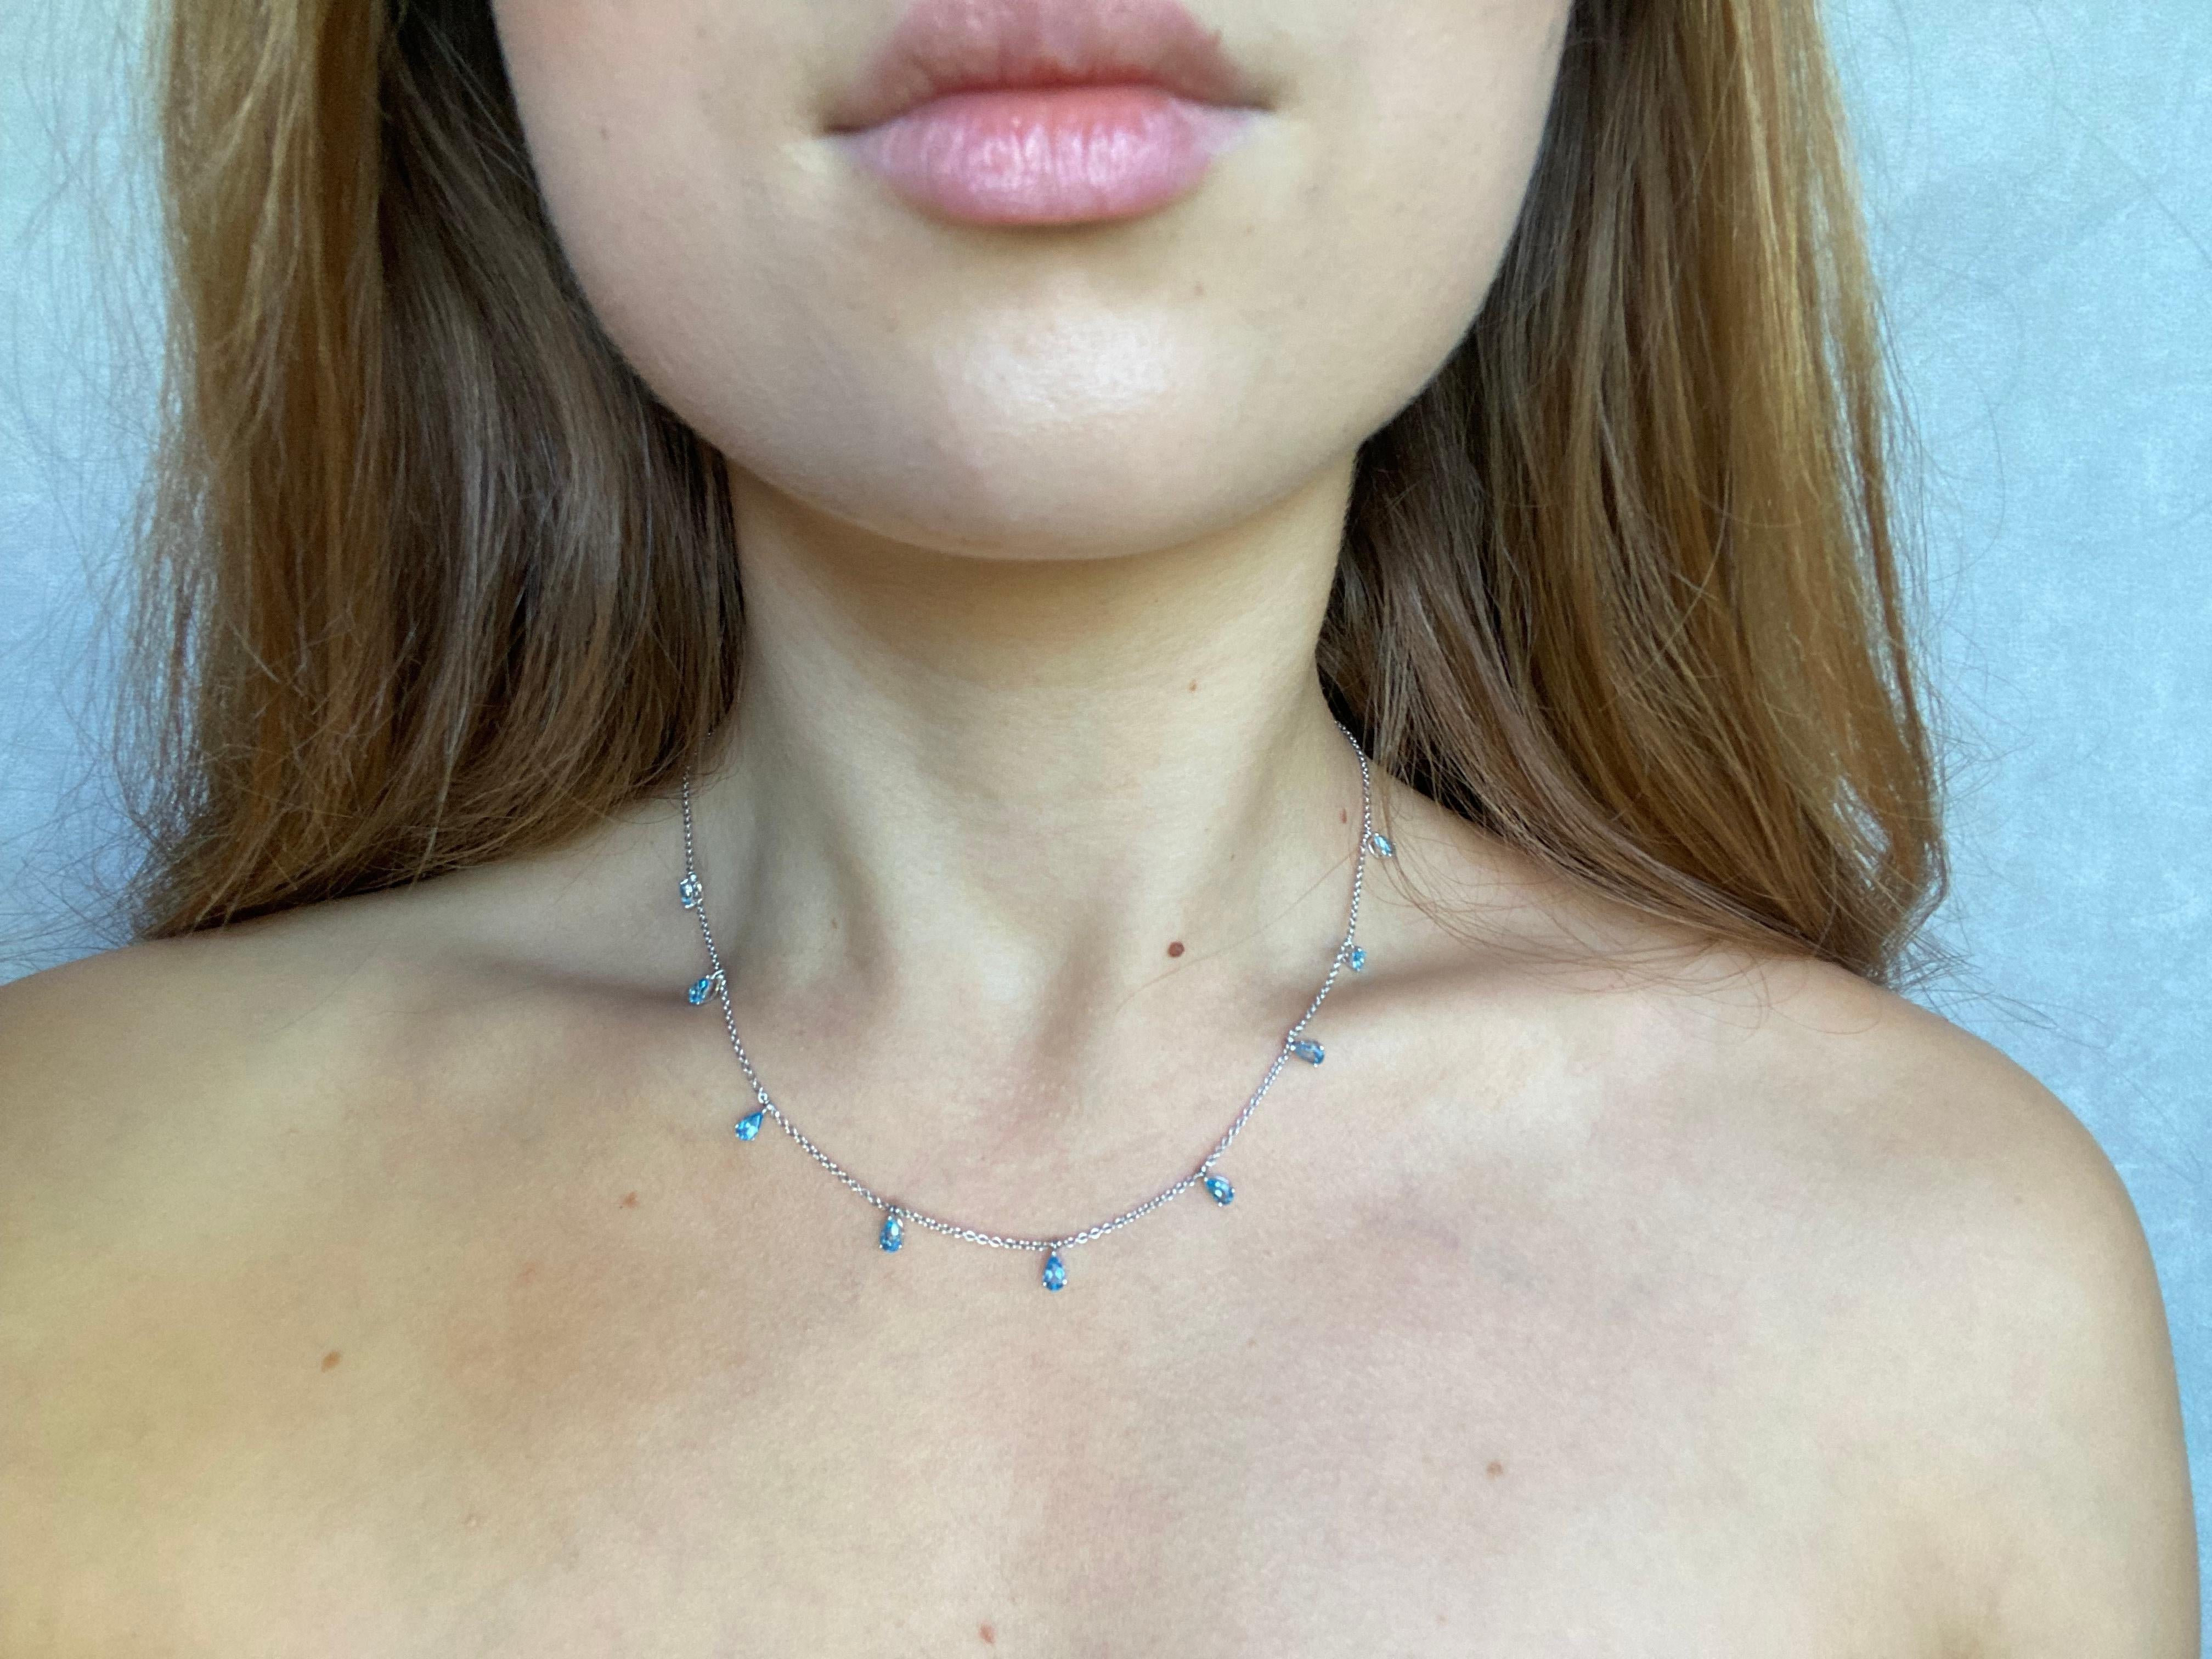 The ultra light adjustable construction of this Chocker necklace allows you to control the length of the chain and wear it either as a high neck Chocker or a relaxed casual necklace on your collarbones. These timeless pear shaped Swiss blue topaz